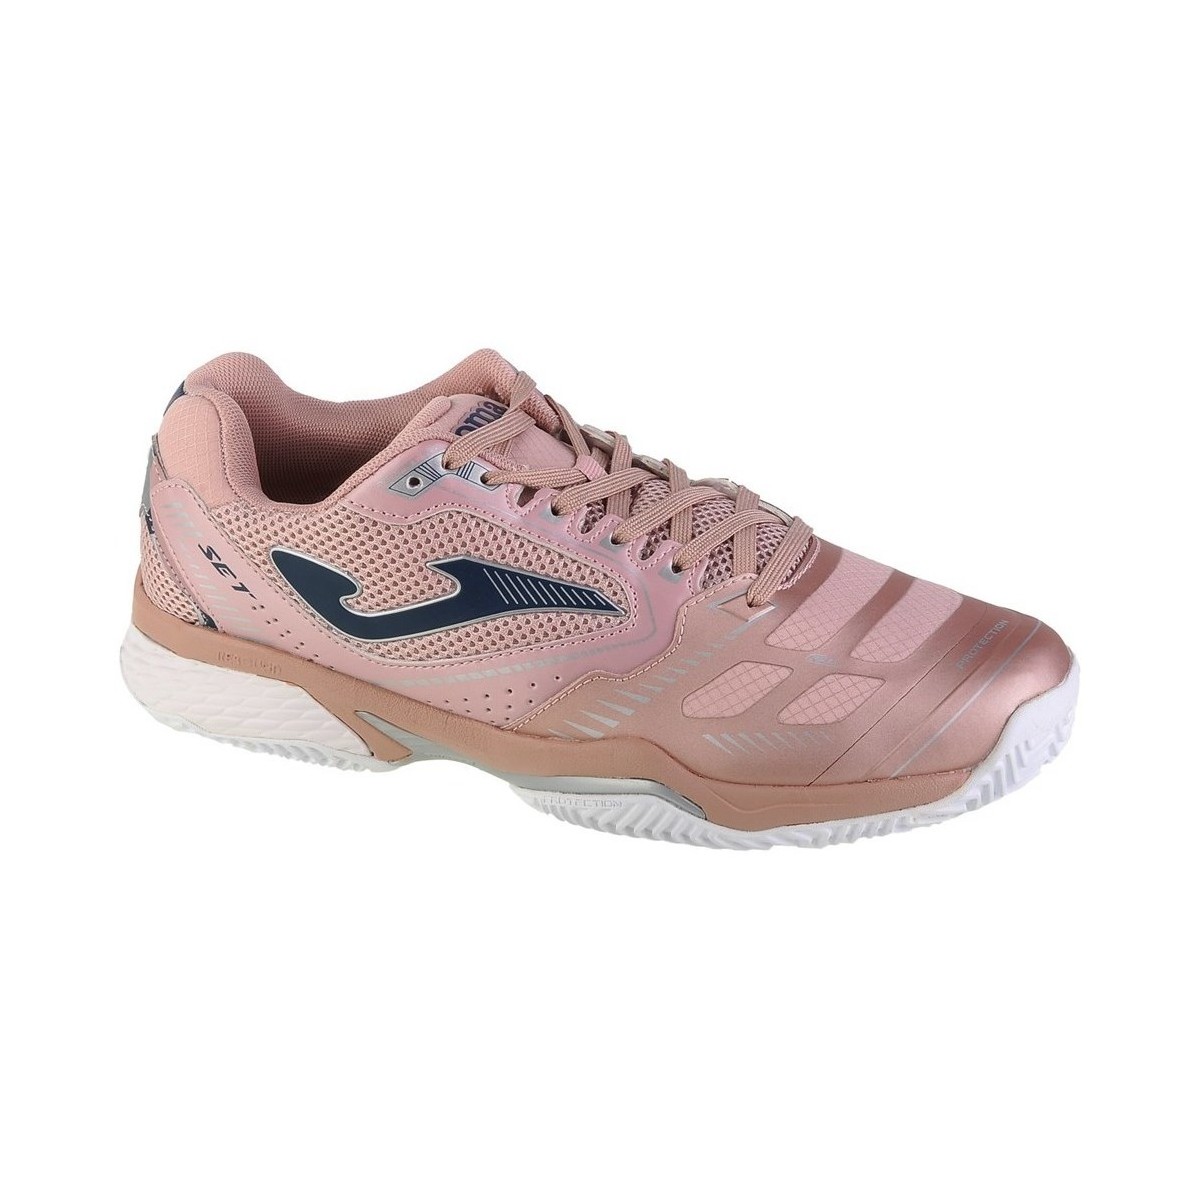 Chaussures Femme Football Joma Set Lady 2113 Rose